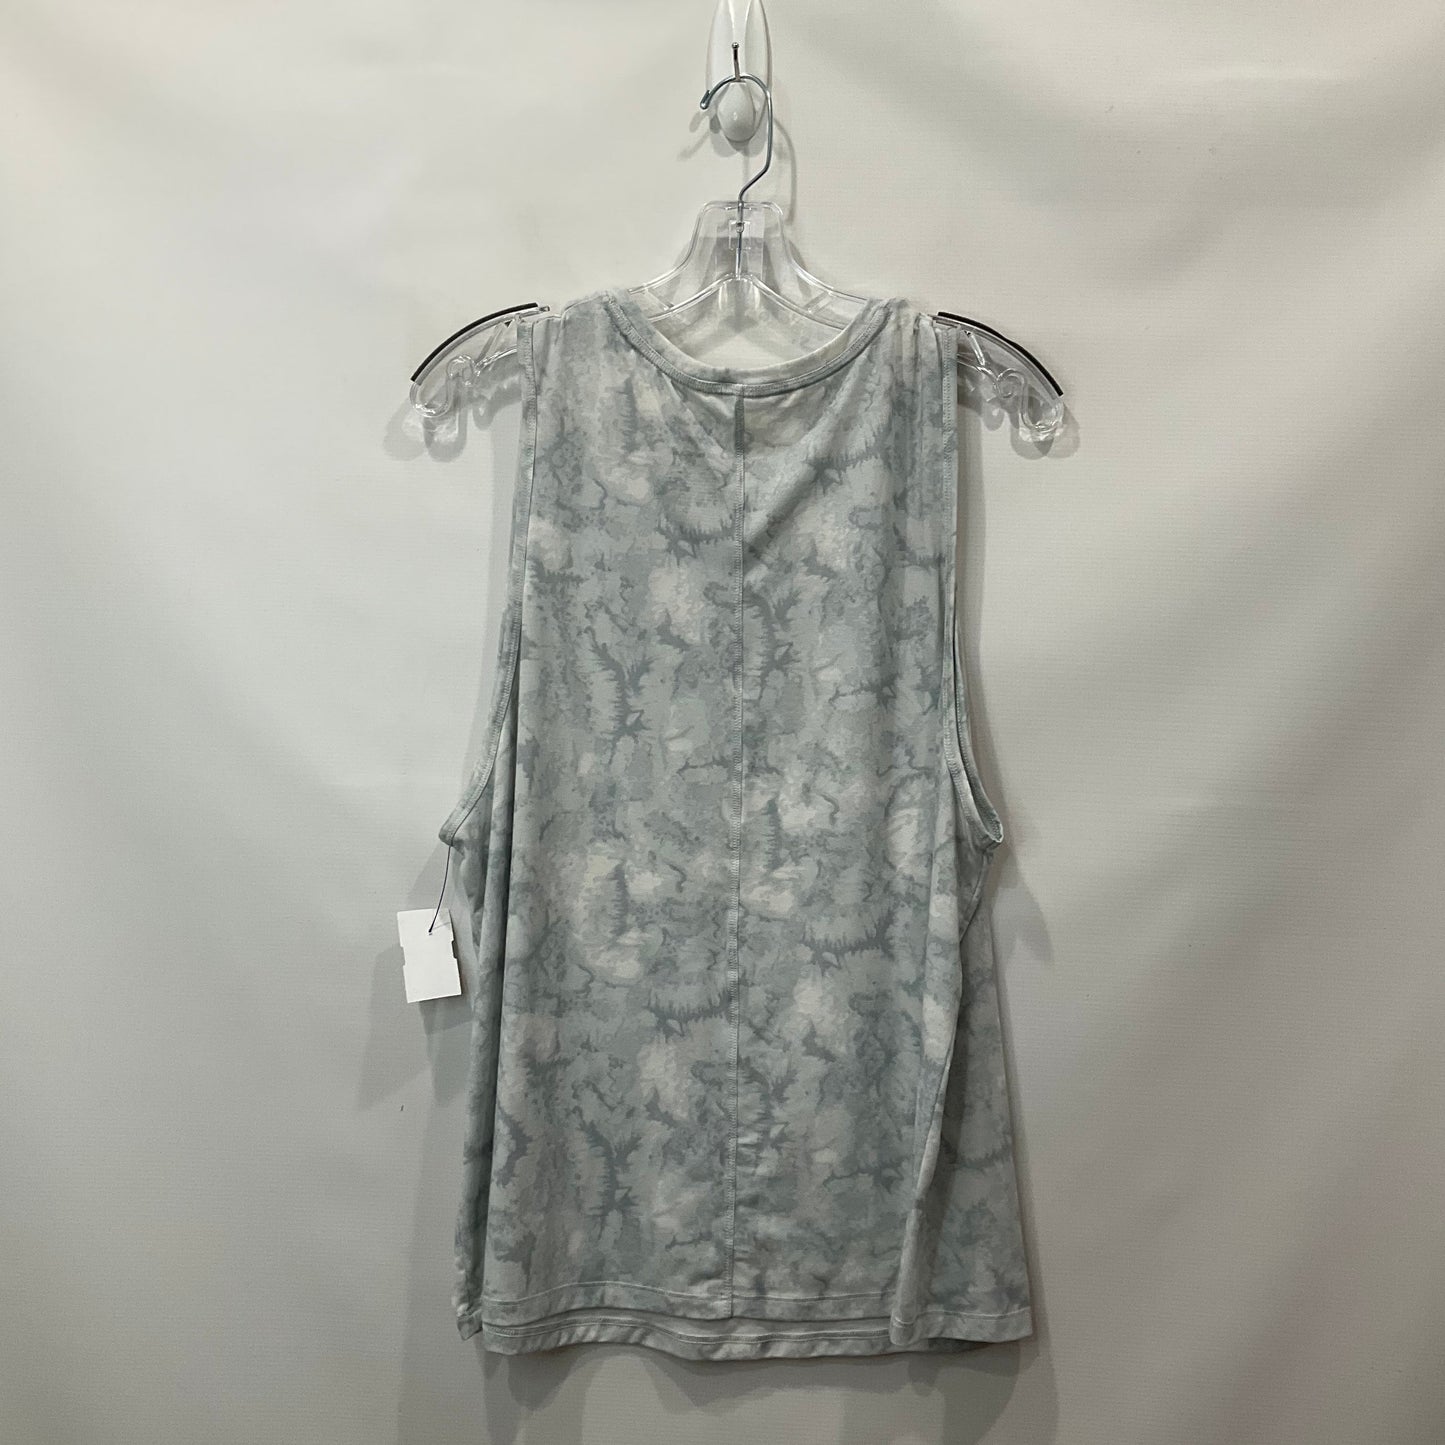 Grey & White Athletic Tank Top All In Motion, Size 2x